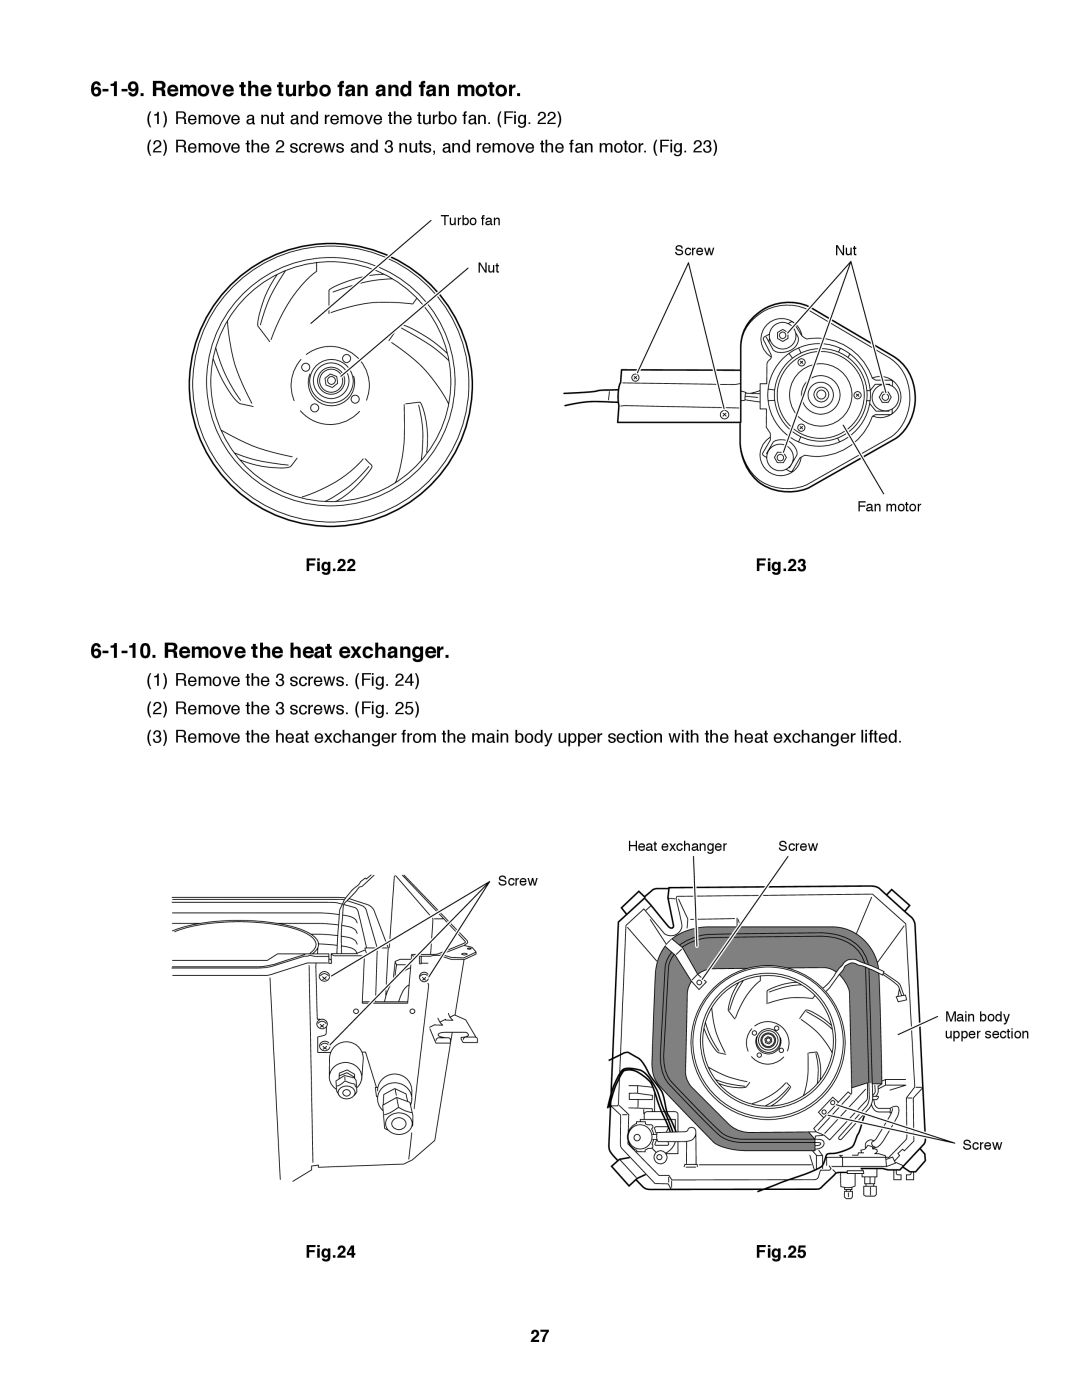 Sanyo XMHS1272, XMHS0972 service manual Remove the turbo fan and fan motor, Remove the heat exchanger 